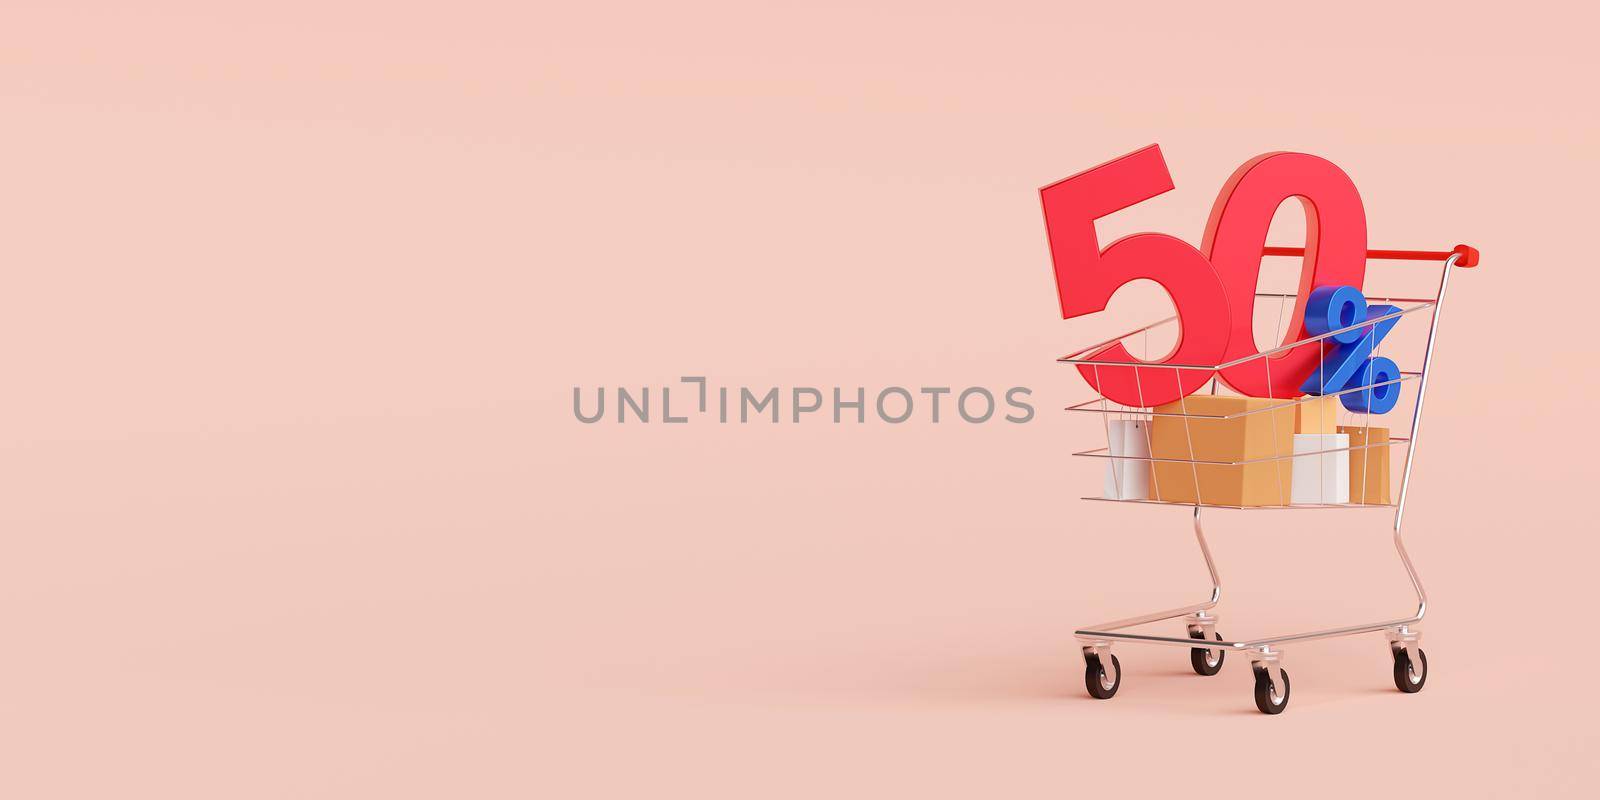 Shopping banner with special offer discount up to 50%, 3d illustration by nutzchotwarut